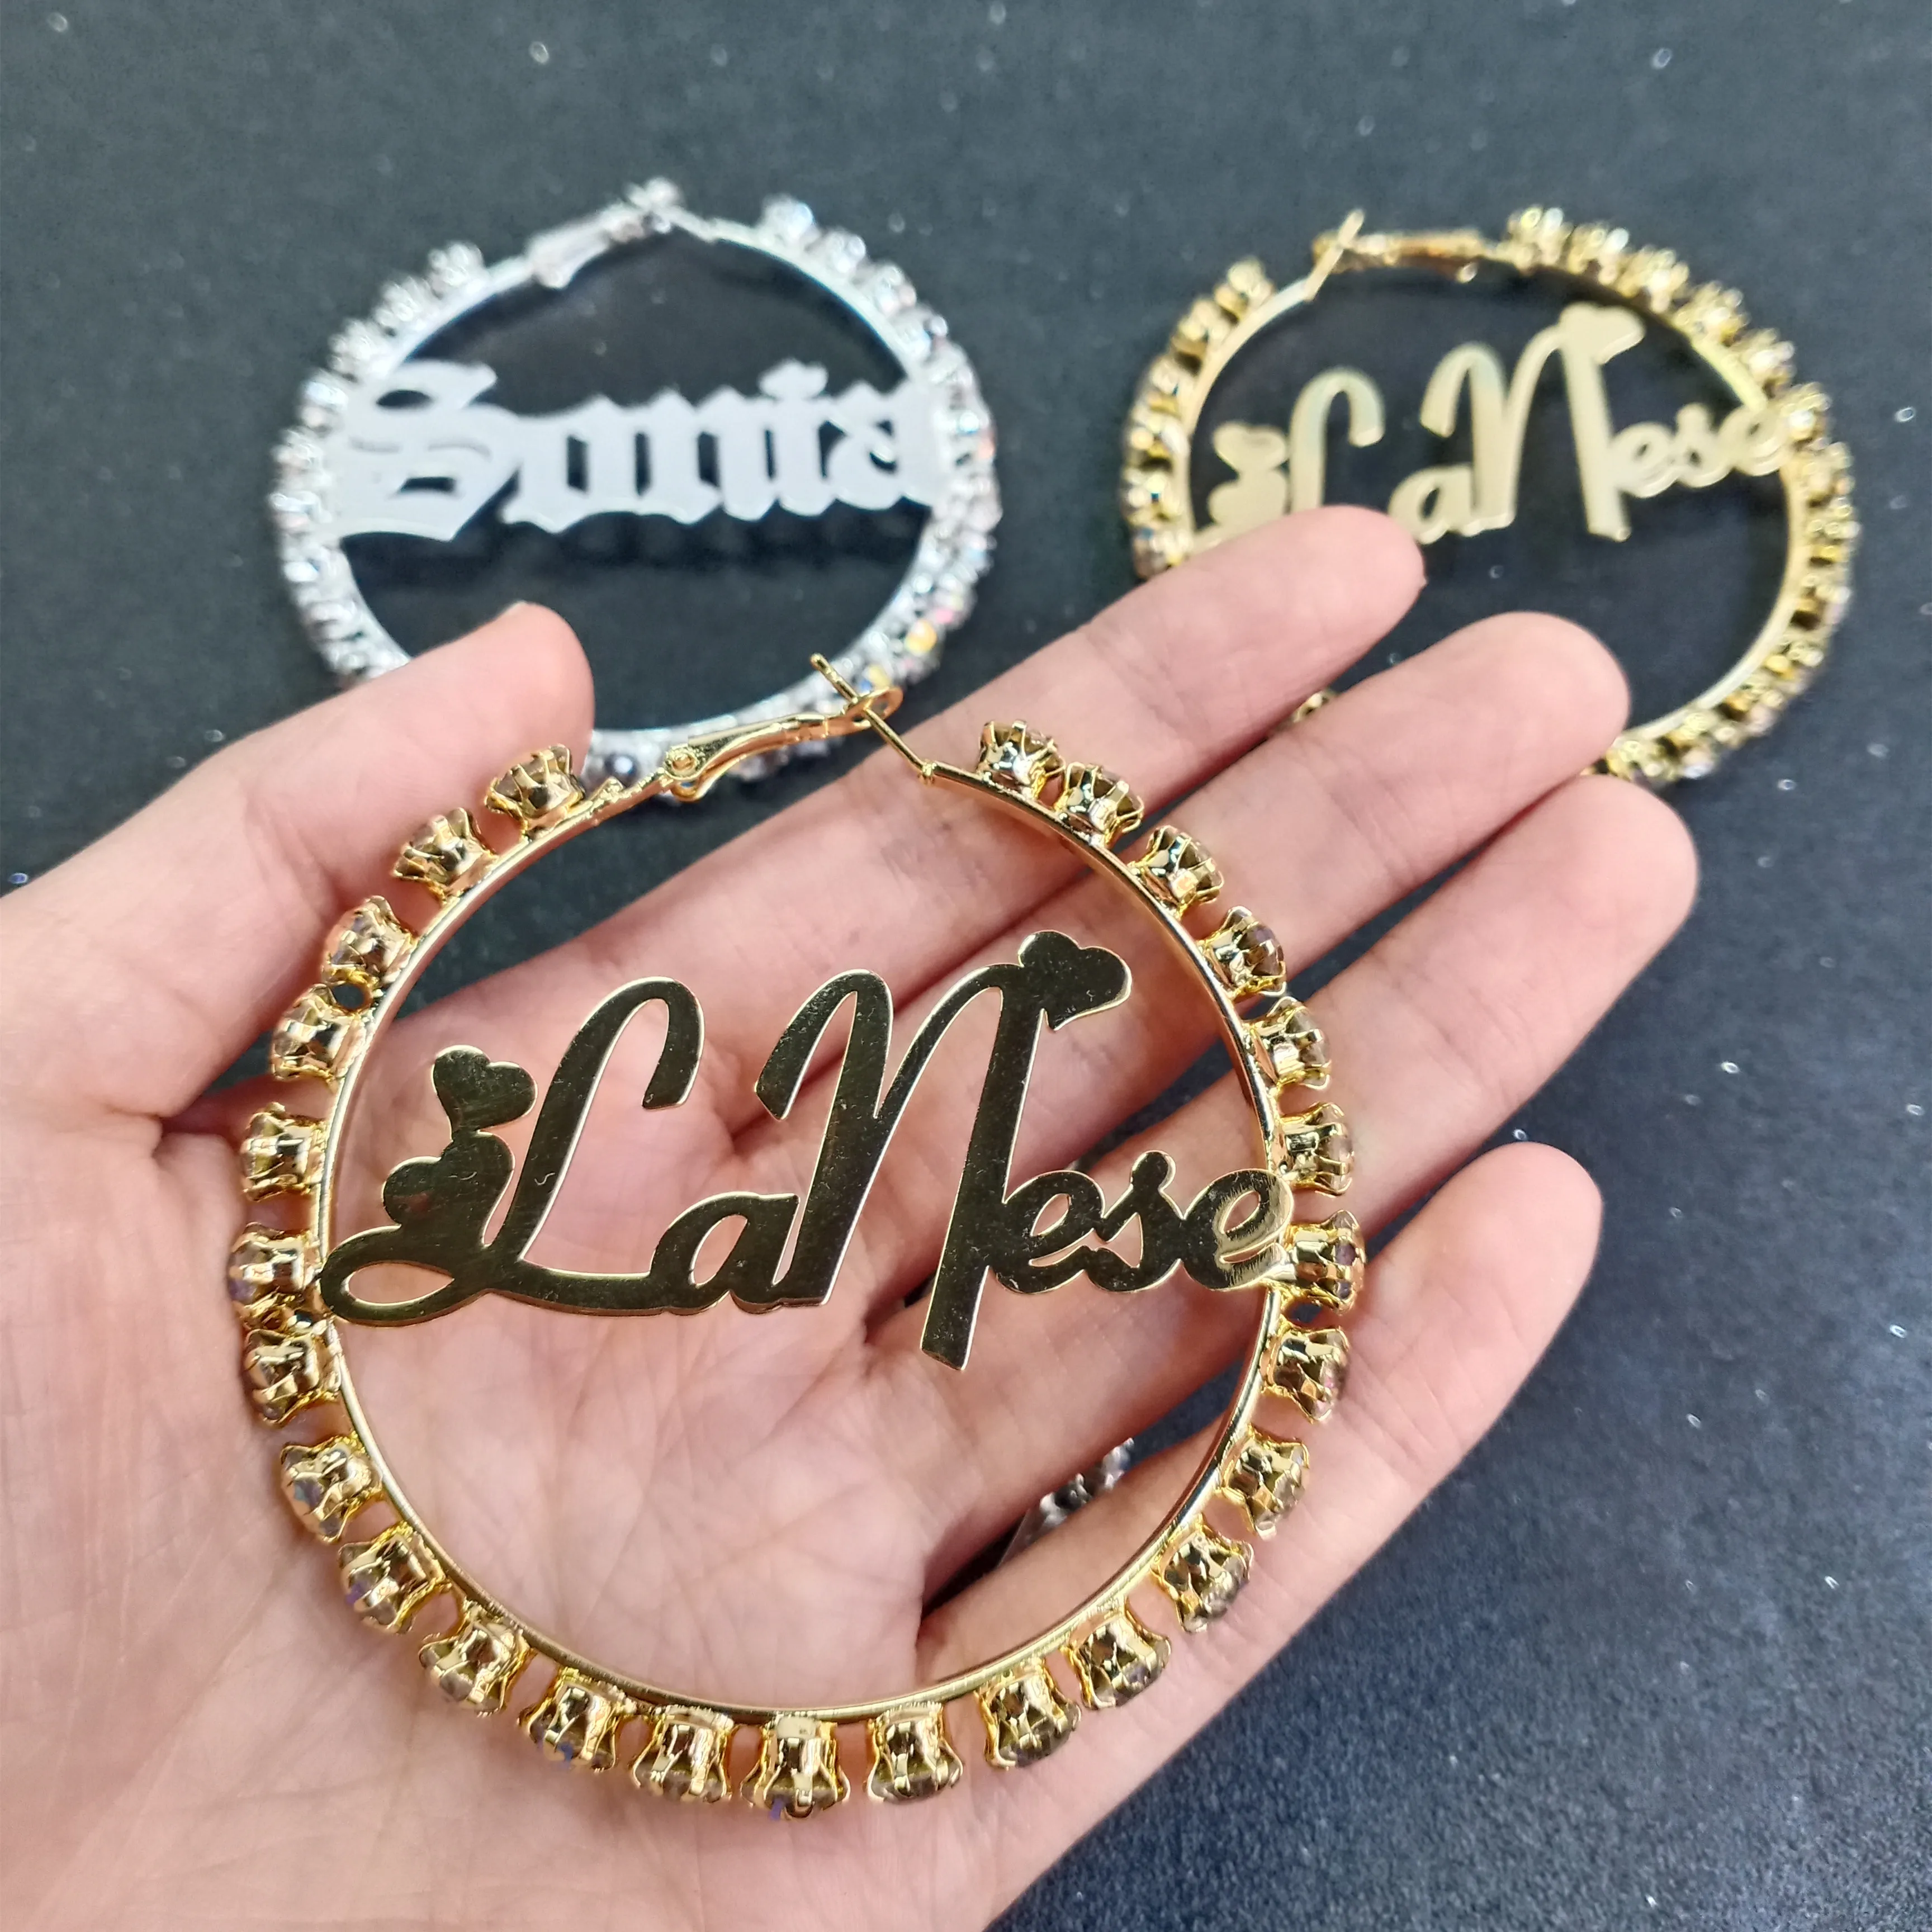 Lateefah Customed Jewelry  Zircon Big Earrings for Women Girls Sexy Hoop Earrings Personal Custom Name Earrings 2021 Trend custom american cemitem cosplay just joking cemitem customizable a and b gift goods support personal name